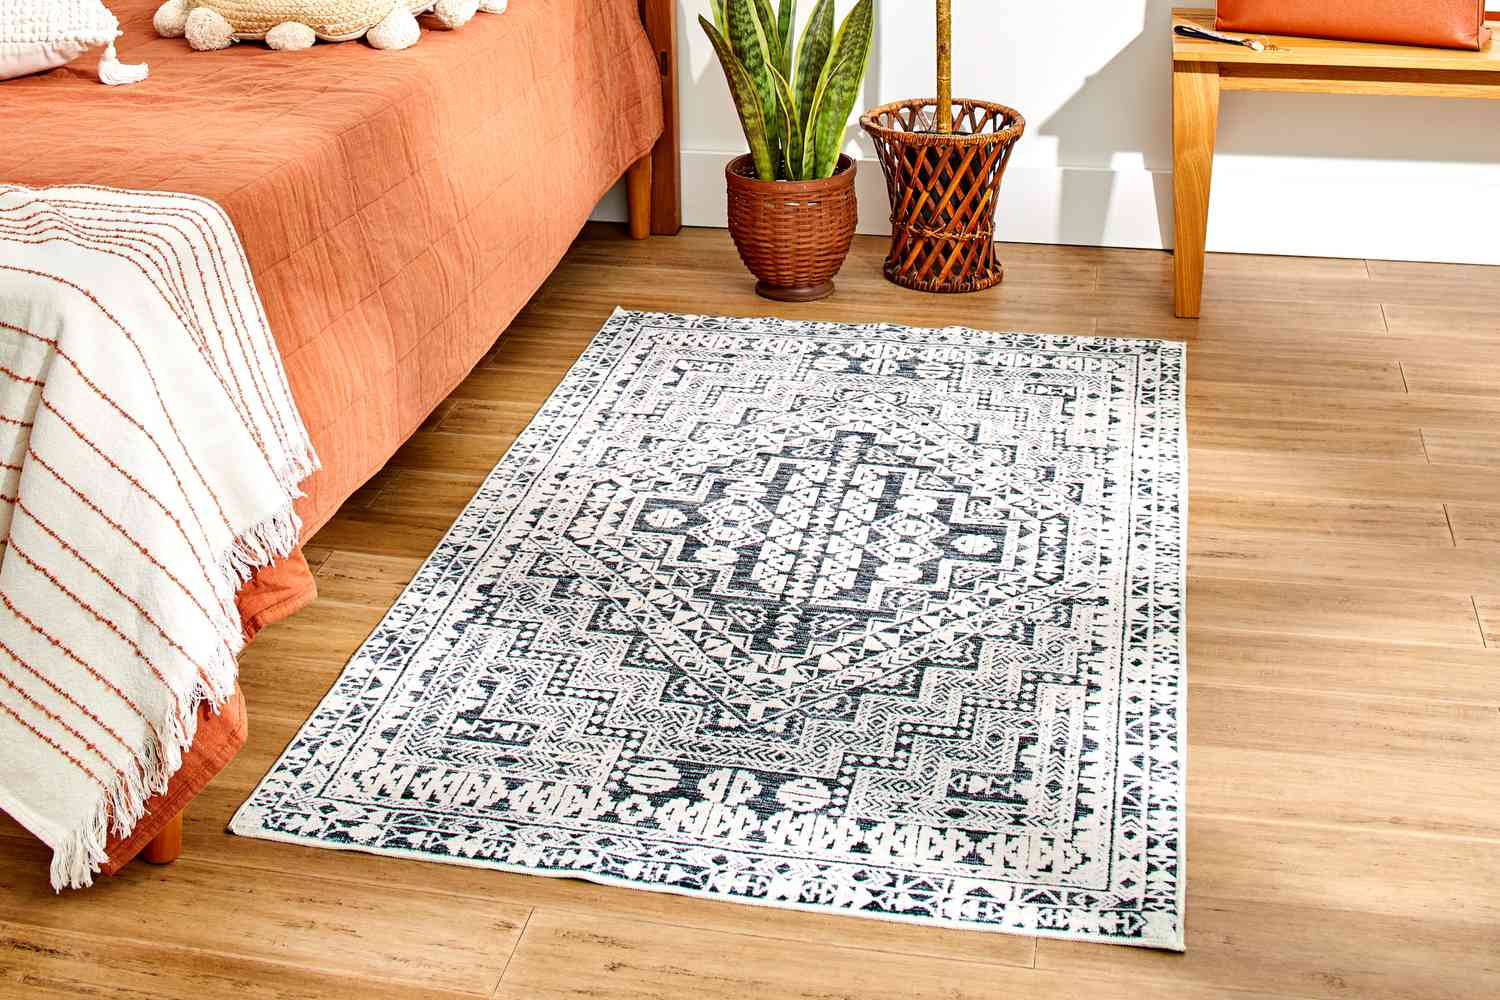 The World Market Iman Black And Ivory Persian Style Washable Area Rug in a bedroom setting